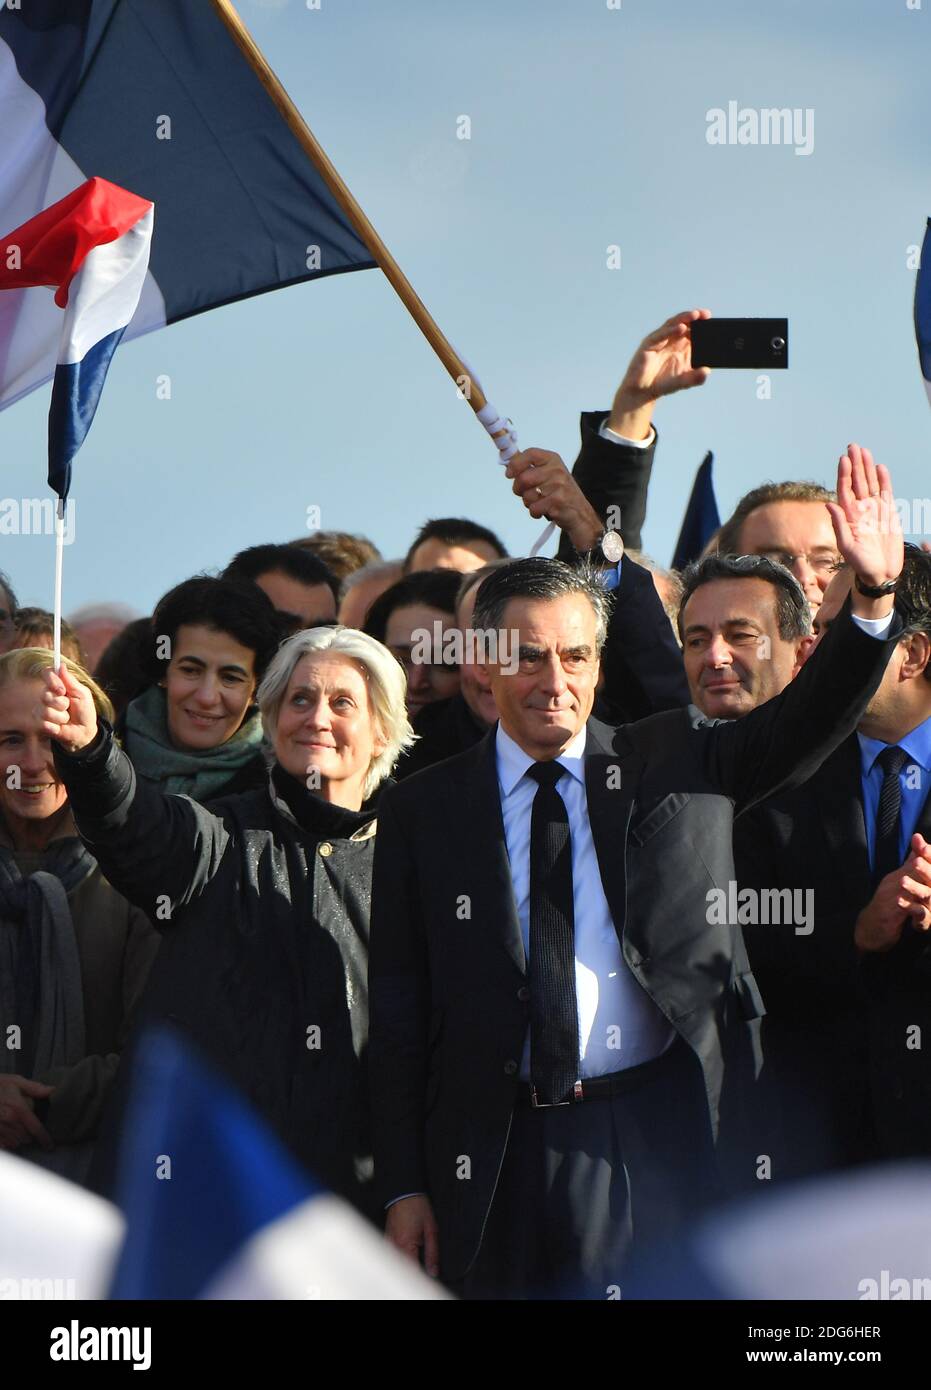 Presidential election candidate for the right-wing Les Republicains (LR) party Francois Fillon and wife Penelope Fillon gesture during a rally at the Place du Trocadero, in Paris, France, on March 5, 2017. Embattled French conservative Francois Fillon told supporters to never give up the fight as he strivses to stay in the presidential election race amid an expenses scandal. Fillon, who is to be charged over claims he gave his wife and children highly-paid fake parliamentary jobs, told the rain-drenched crowd he had been attacked by everyone in the campaign. Photo by Christian Liewig/ABACAPRES Stock Photo